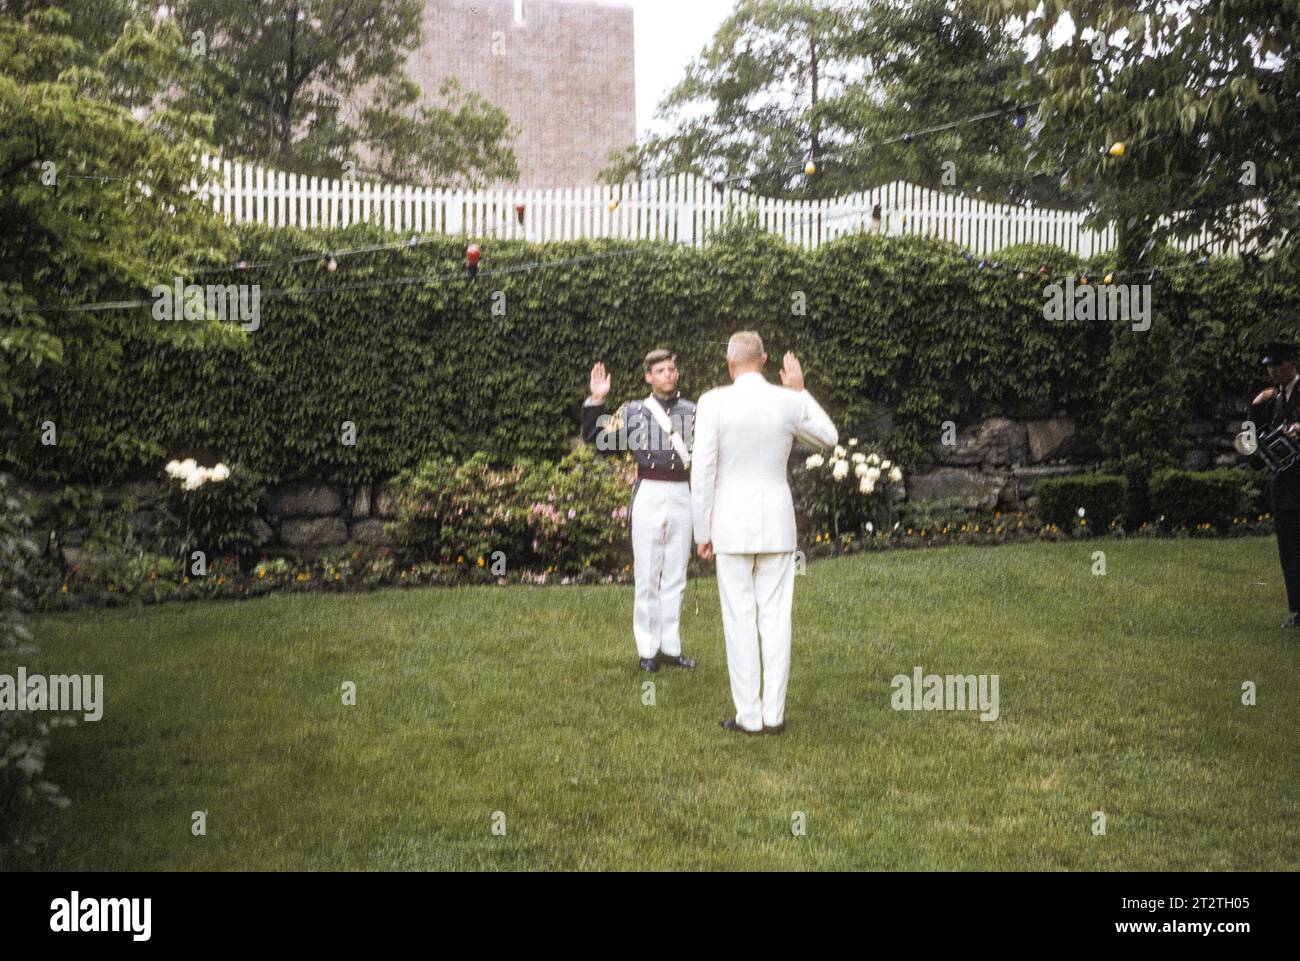 1970 West Point cadet, commissioning ceremony, administering the oath of office, West Point, New York, United States, military Academy, USA Stock Photo